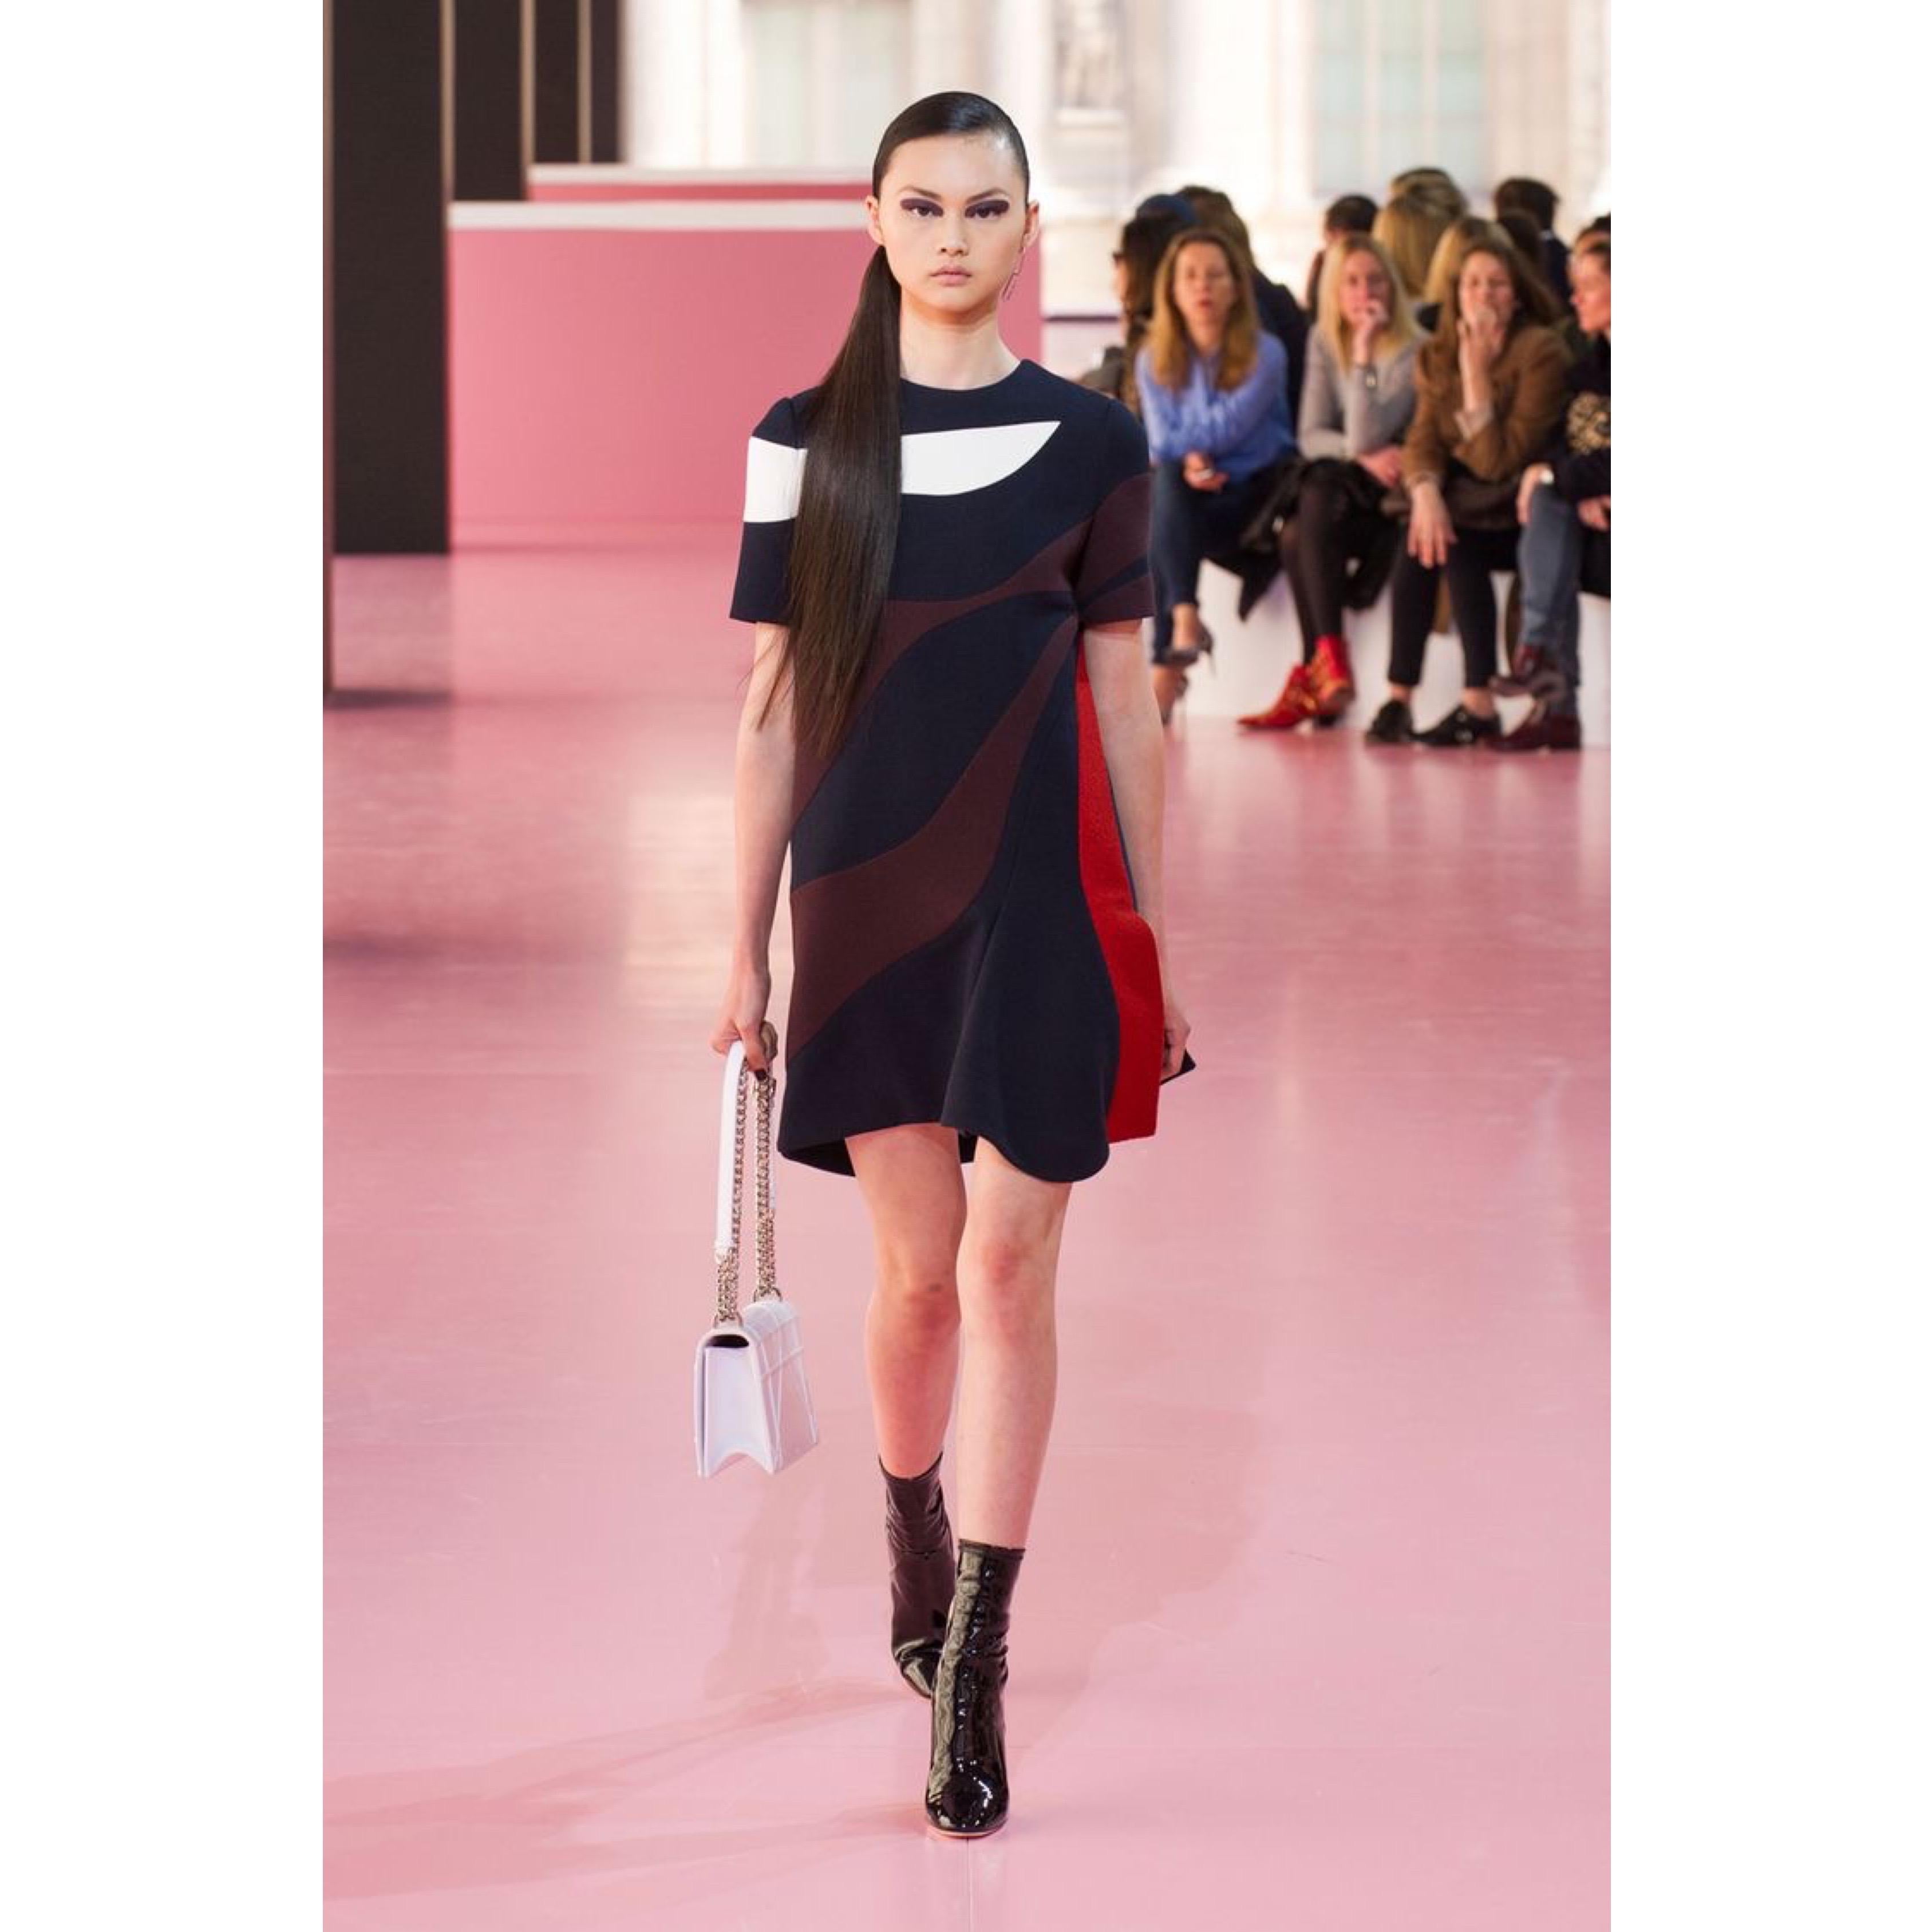 Departing from the wasp-waisted, heavily constructed silhouette that the House of Dior is iconic for, designer Raf Simmons brings a softer definition to tailoring to the table with the Fall 2015 collection. Still with impeccable tailoring and a